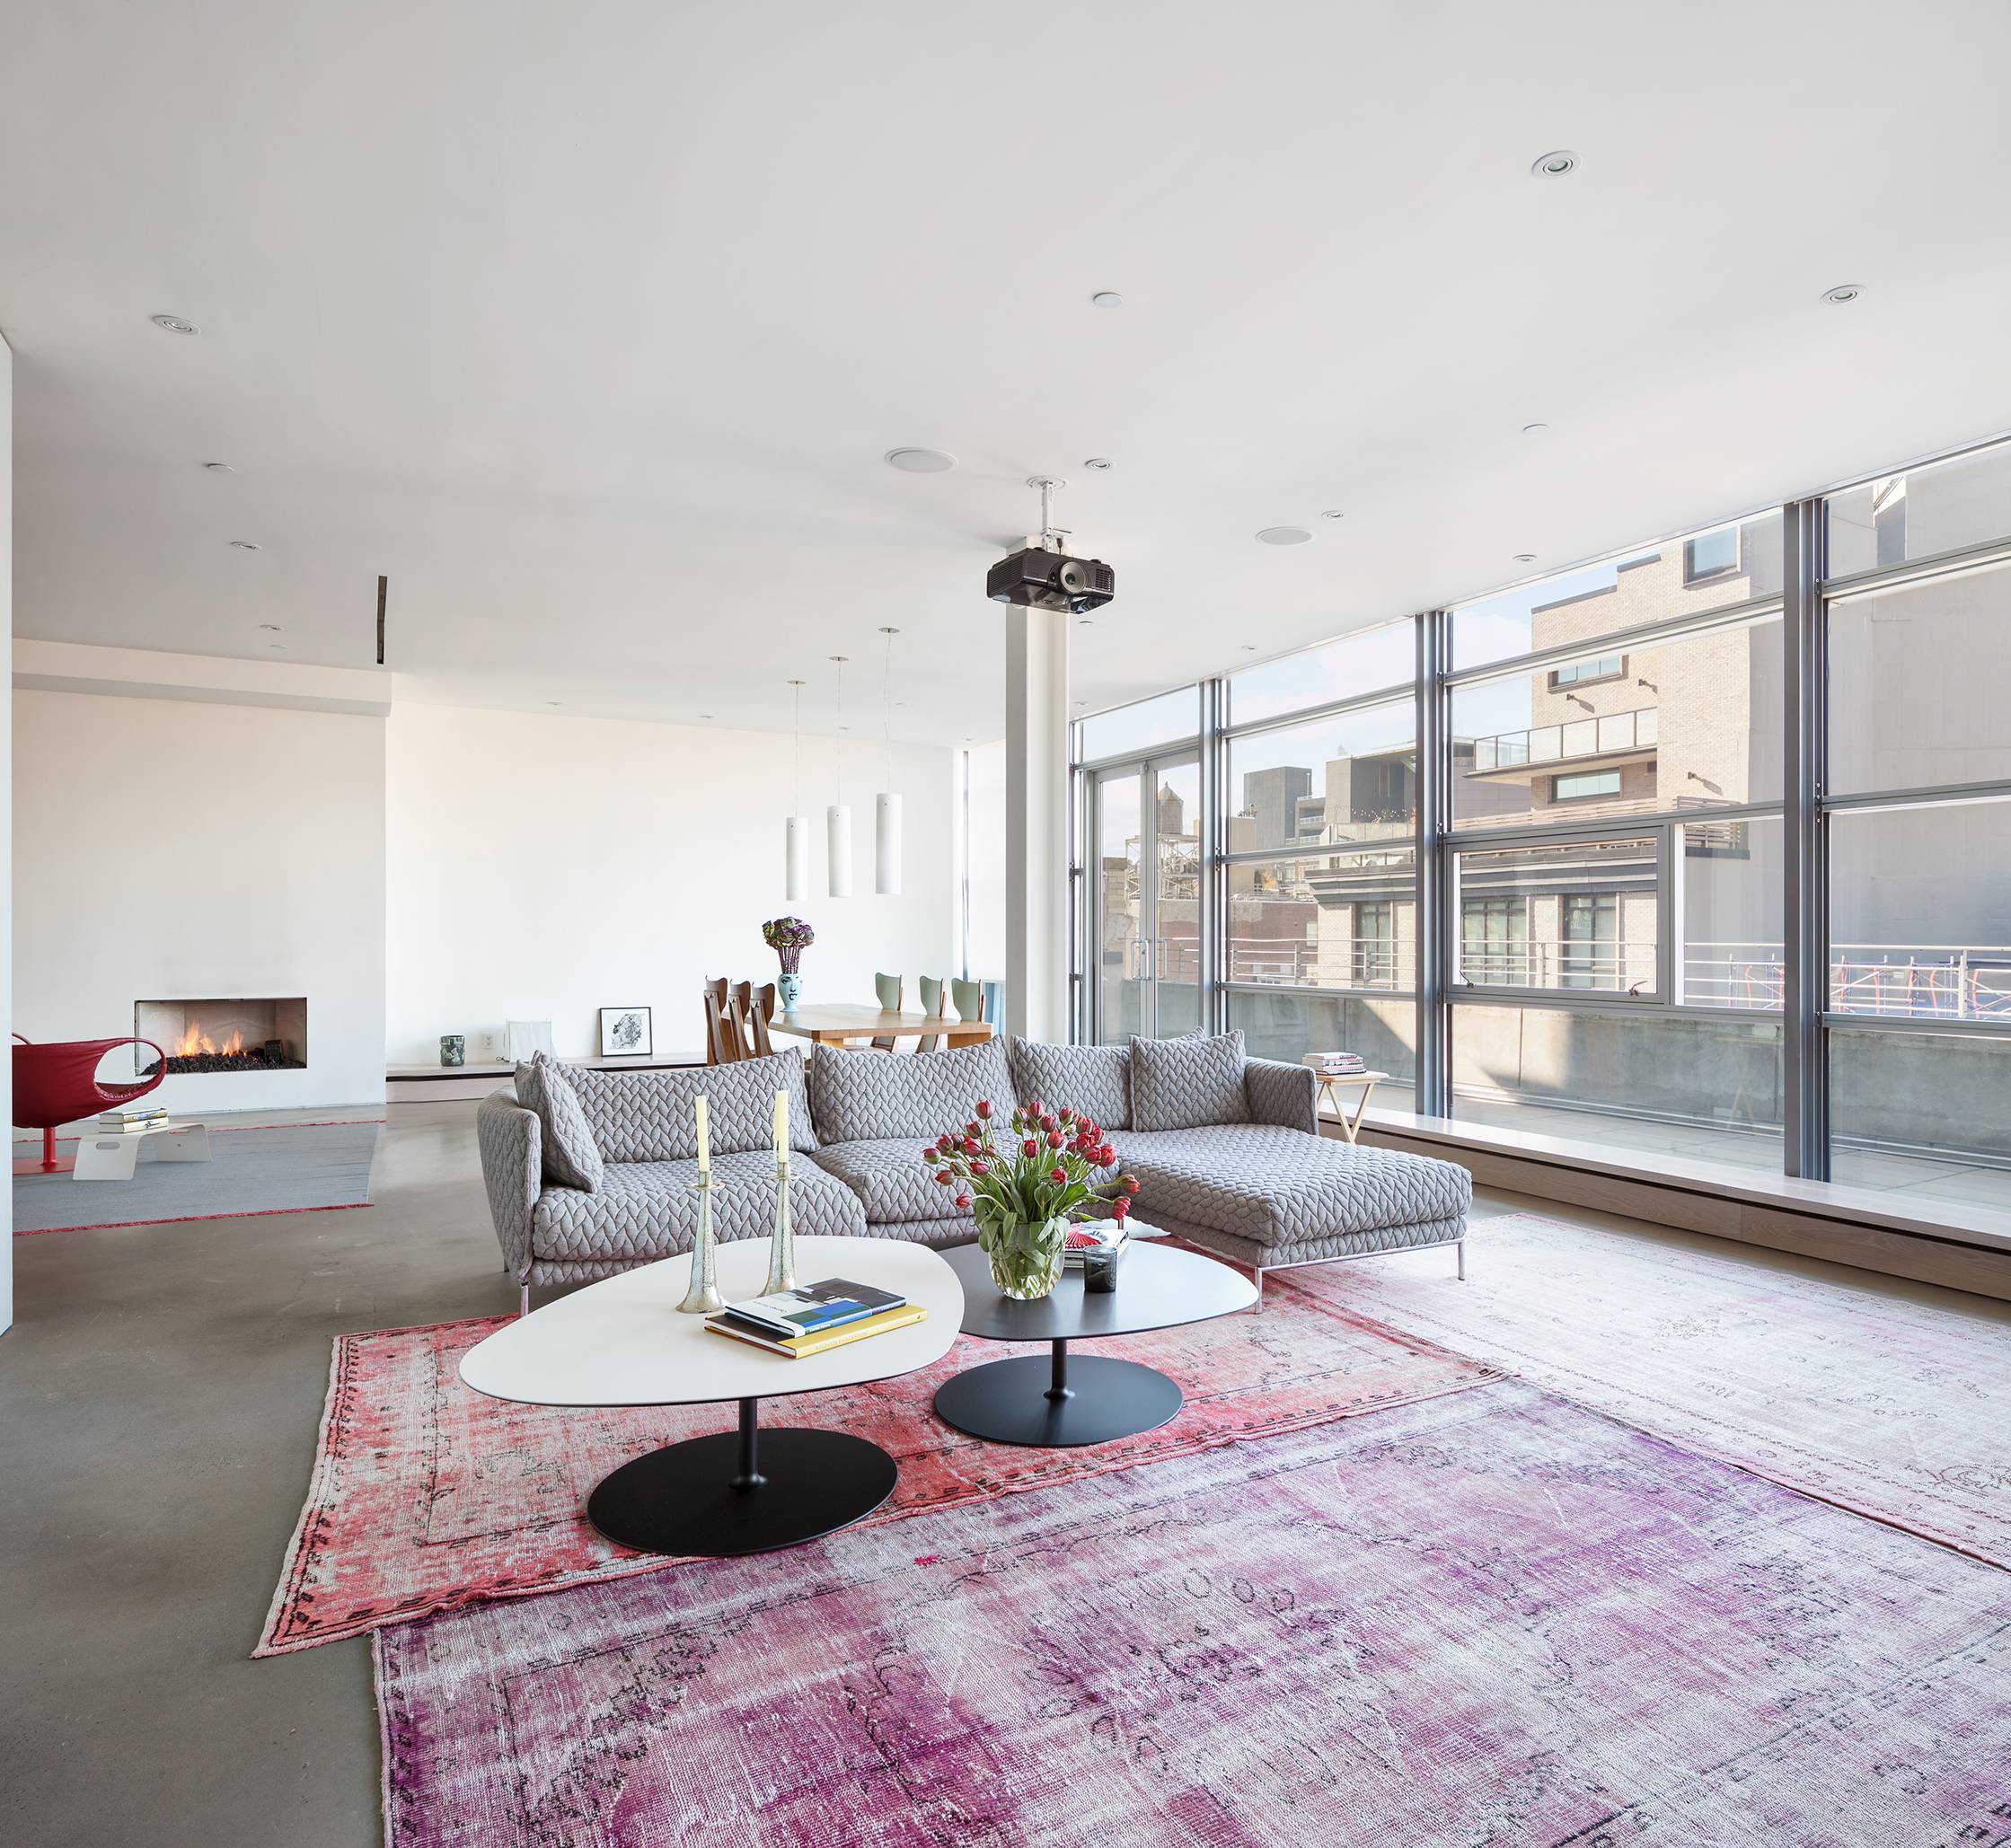 This expansive loft of over 3, 000 square feet features 2 or 3 bedrooms, and 3.